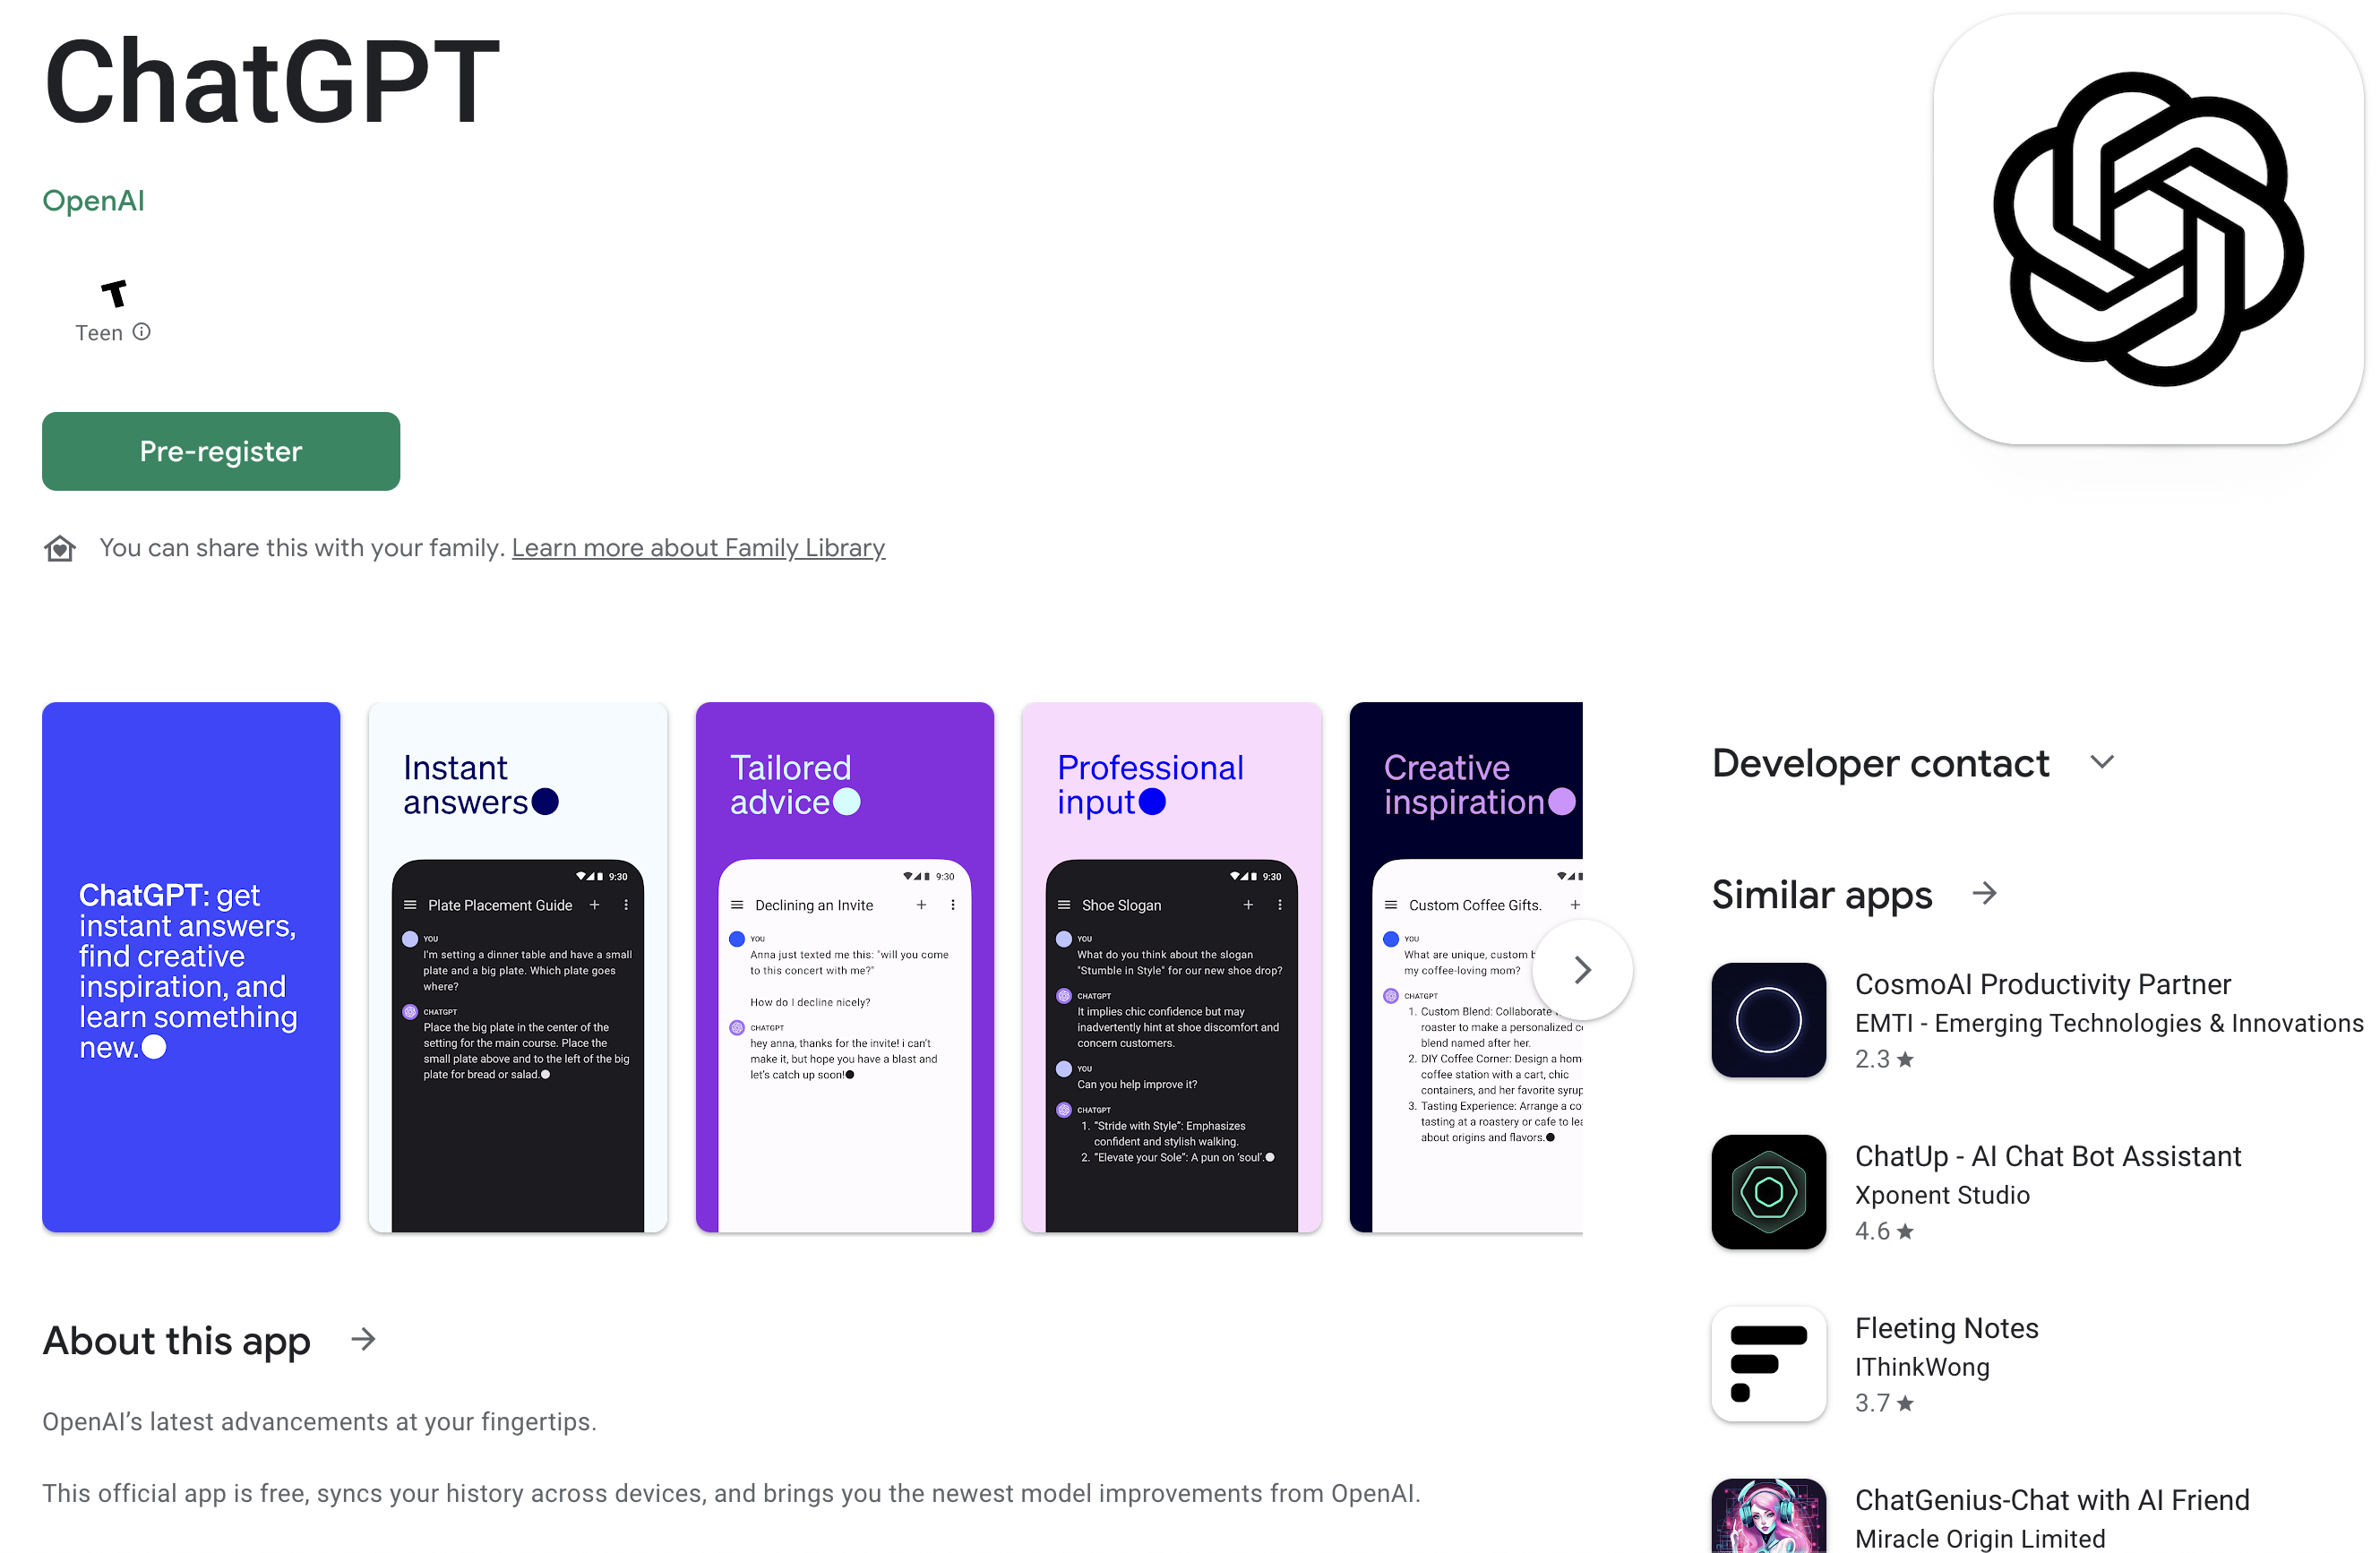 ChatGPT Android app is available for pre-registration on the Google Play Store